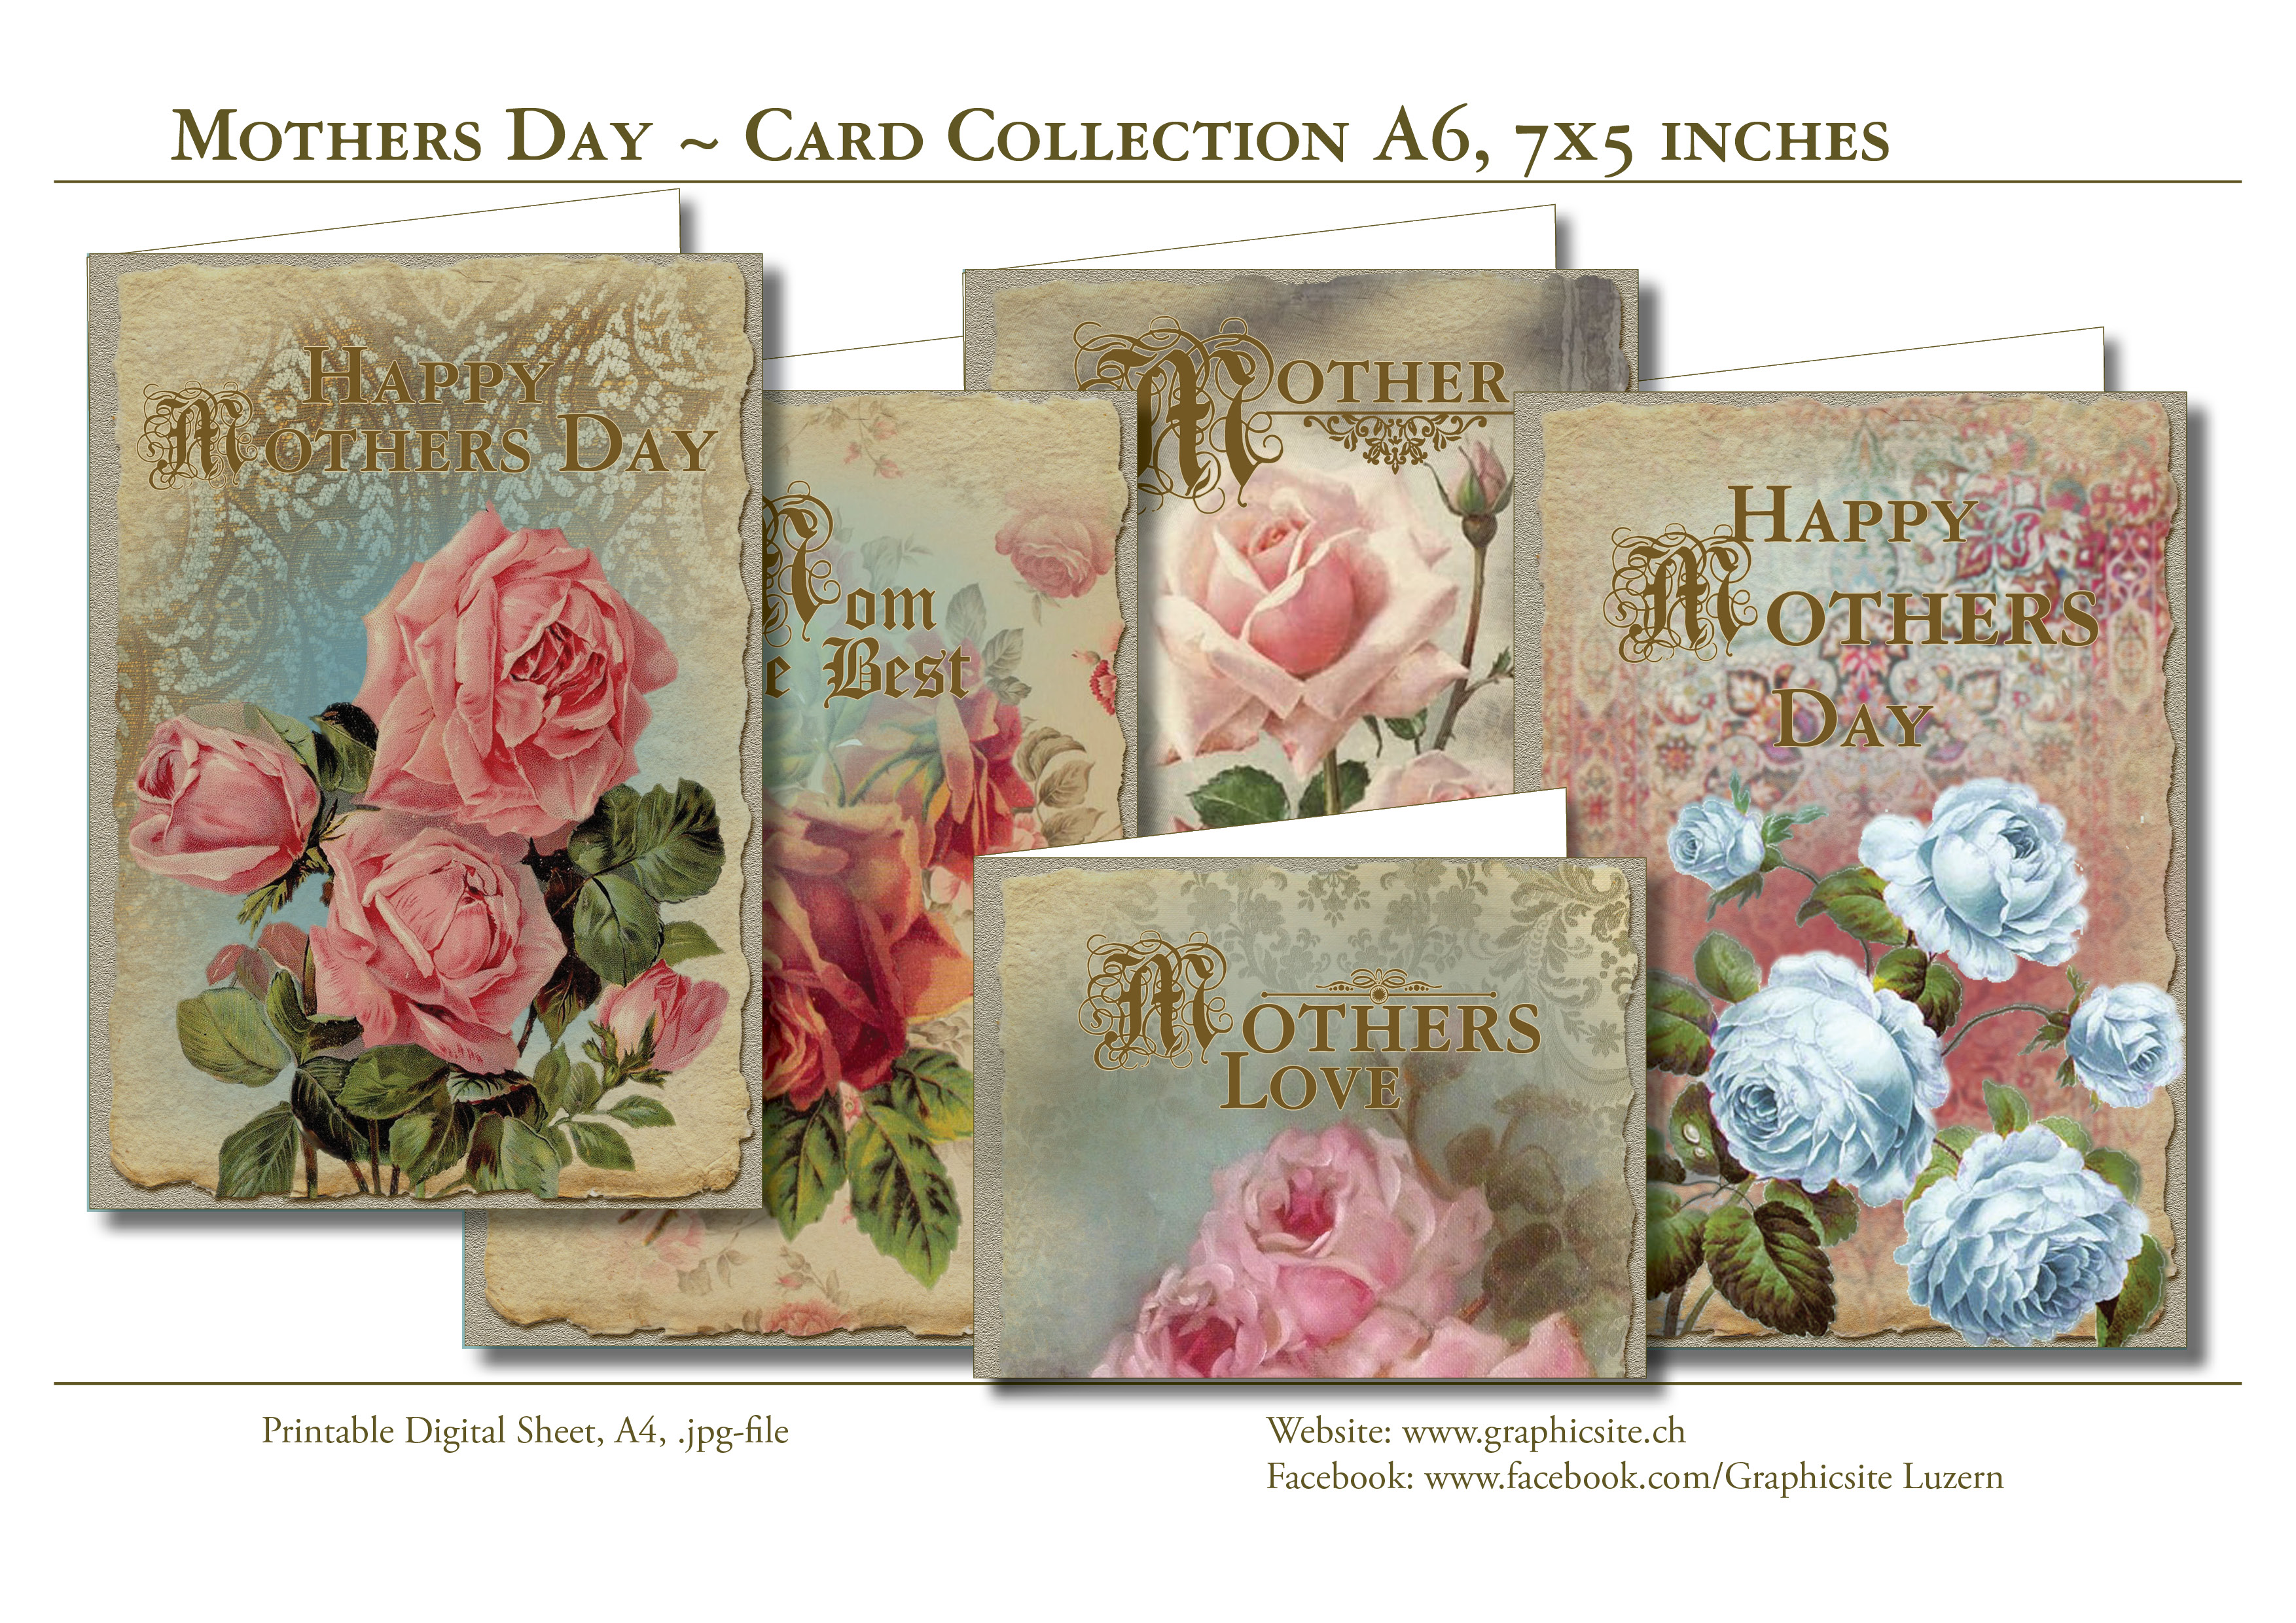 Printable Digital Sheets, Card Collection, MothersDay, Roses, Vintage, Flowers,